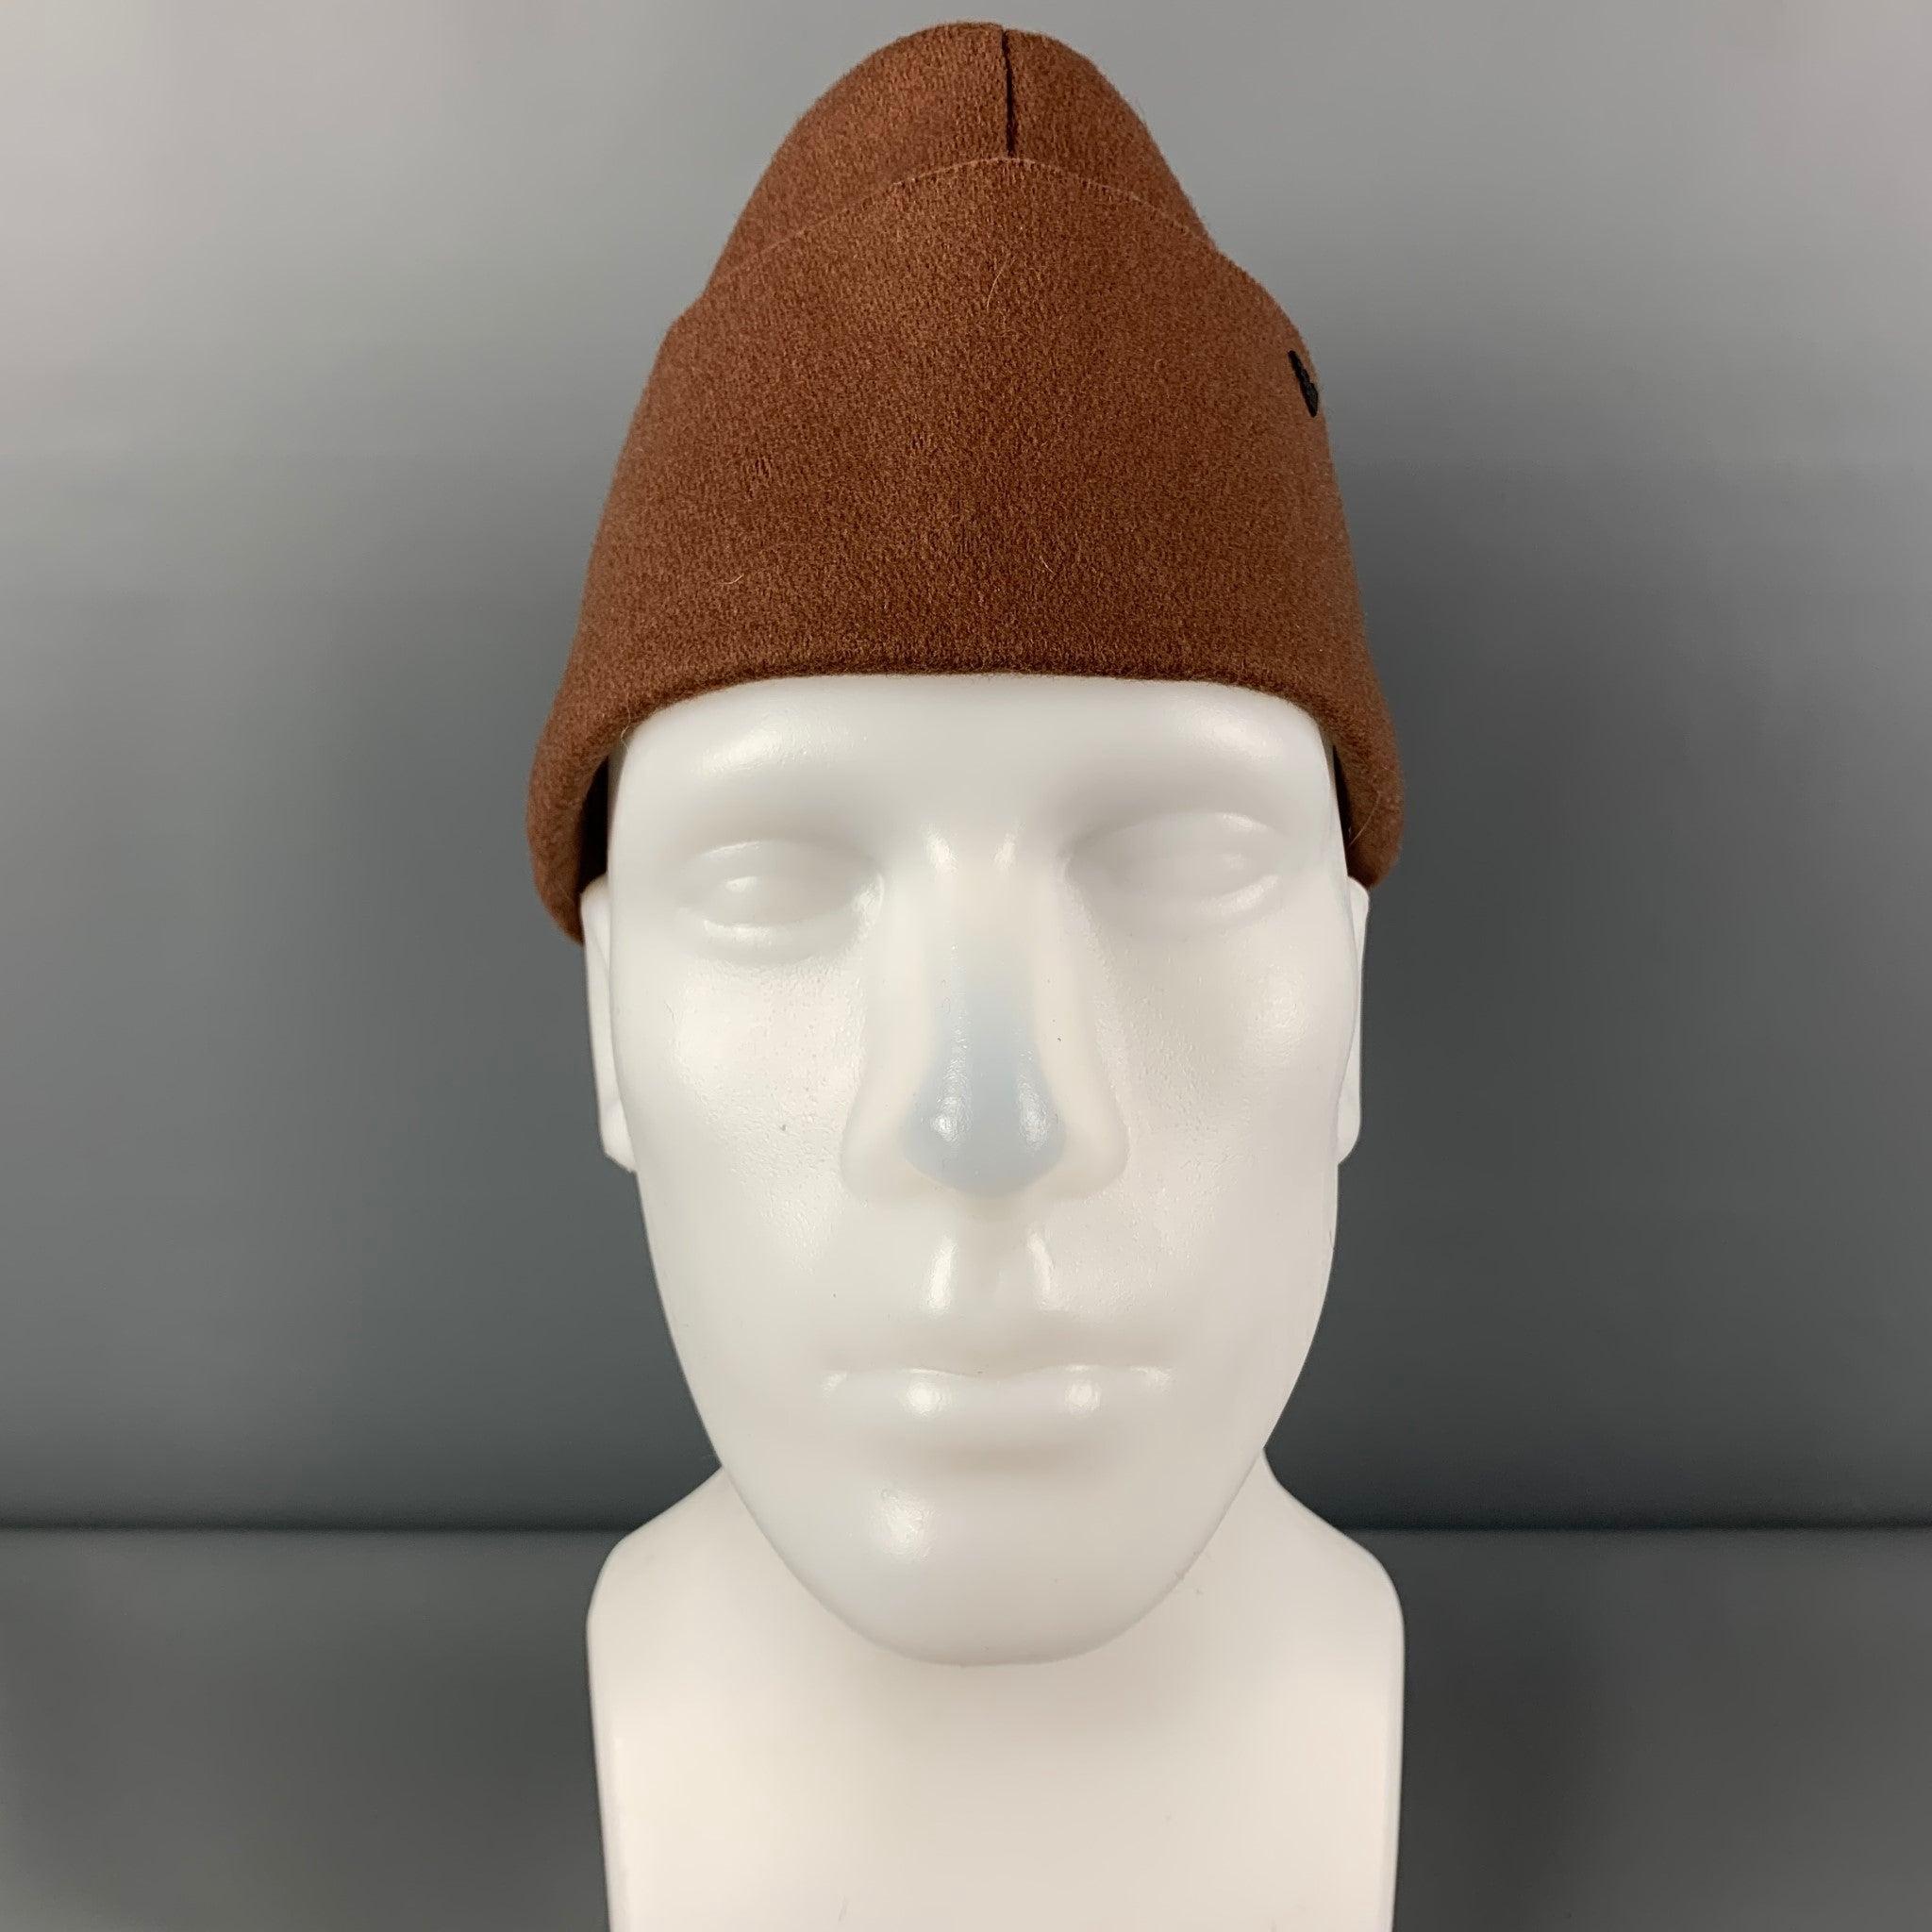 EMPORIO ARMANI hat comes in a brown wool blend featuring a military style and a ribbon trim. Made in Italy.Very Good
Pre-Owned Condition. 

Marked:   58 

Measurements: 
  Opening: 22 inches Brim: 3 inHeight: 5.5 inches 
  
  
 
Reference: